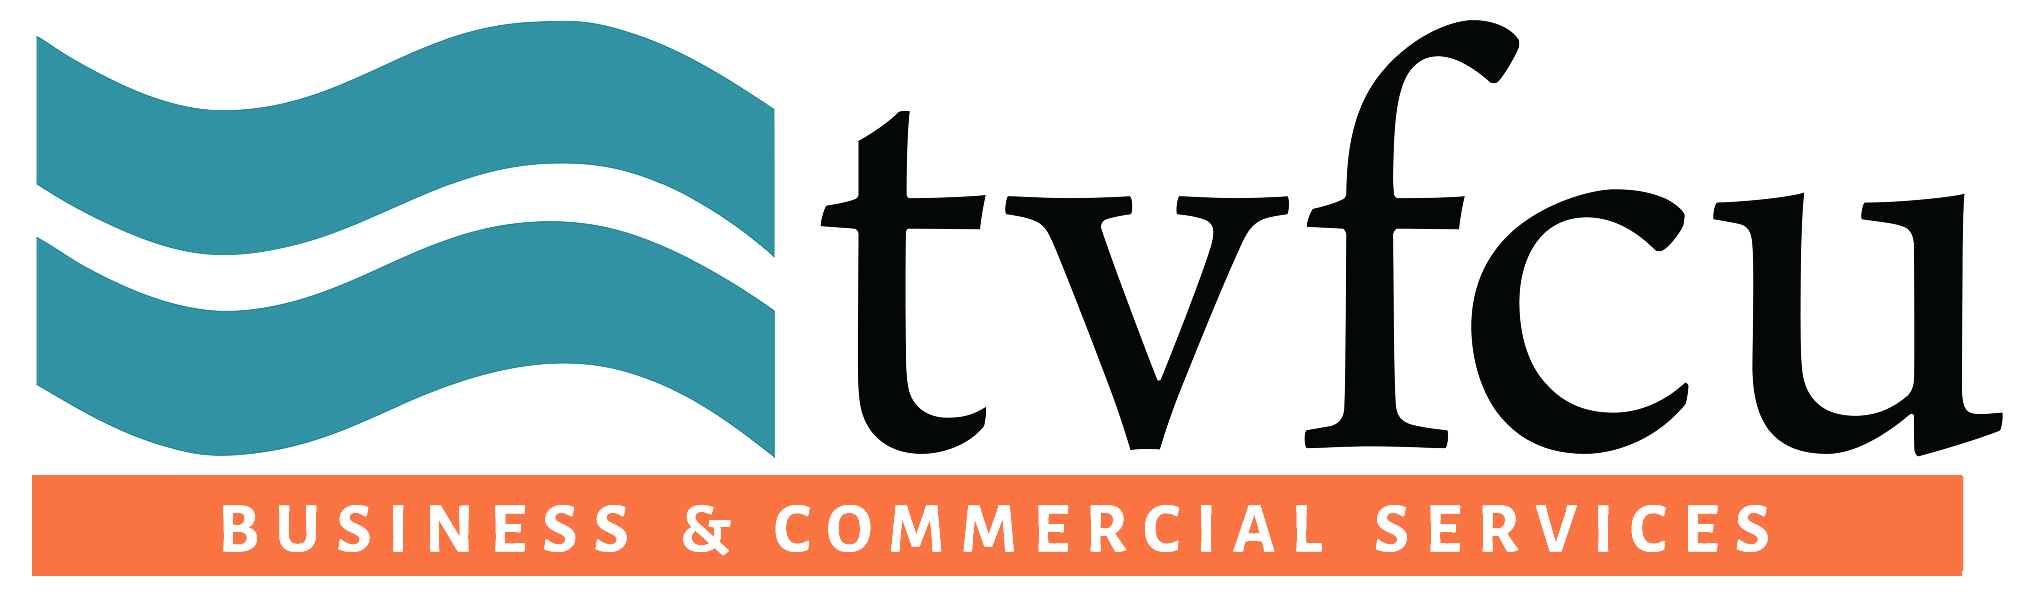 tvfcu business and commercial services logo